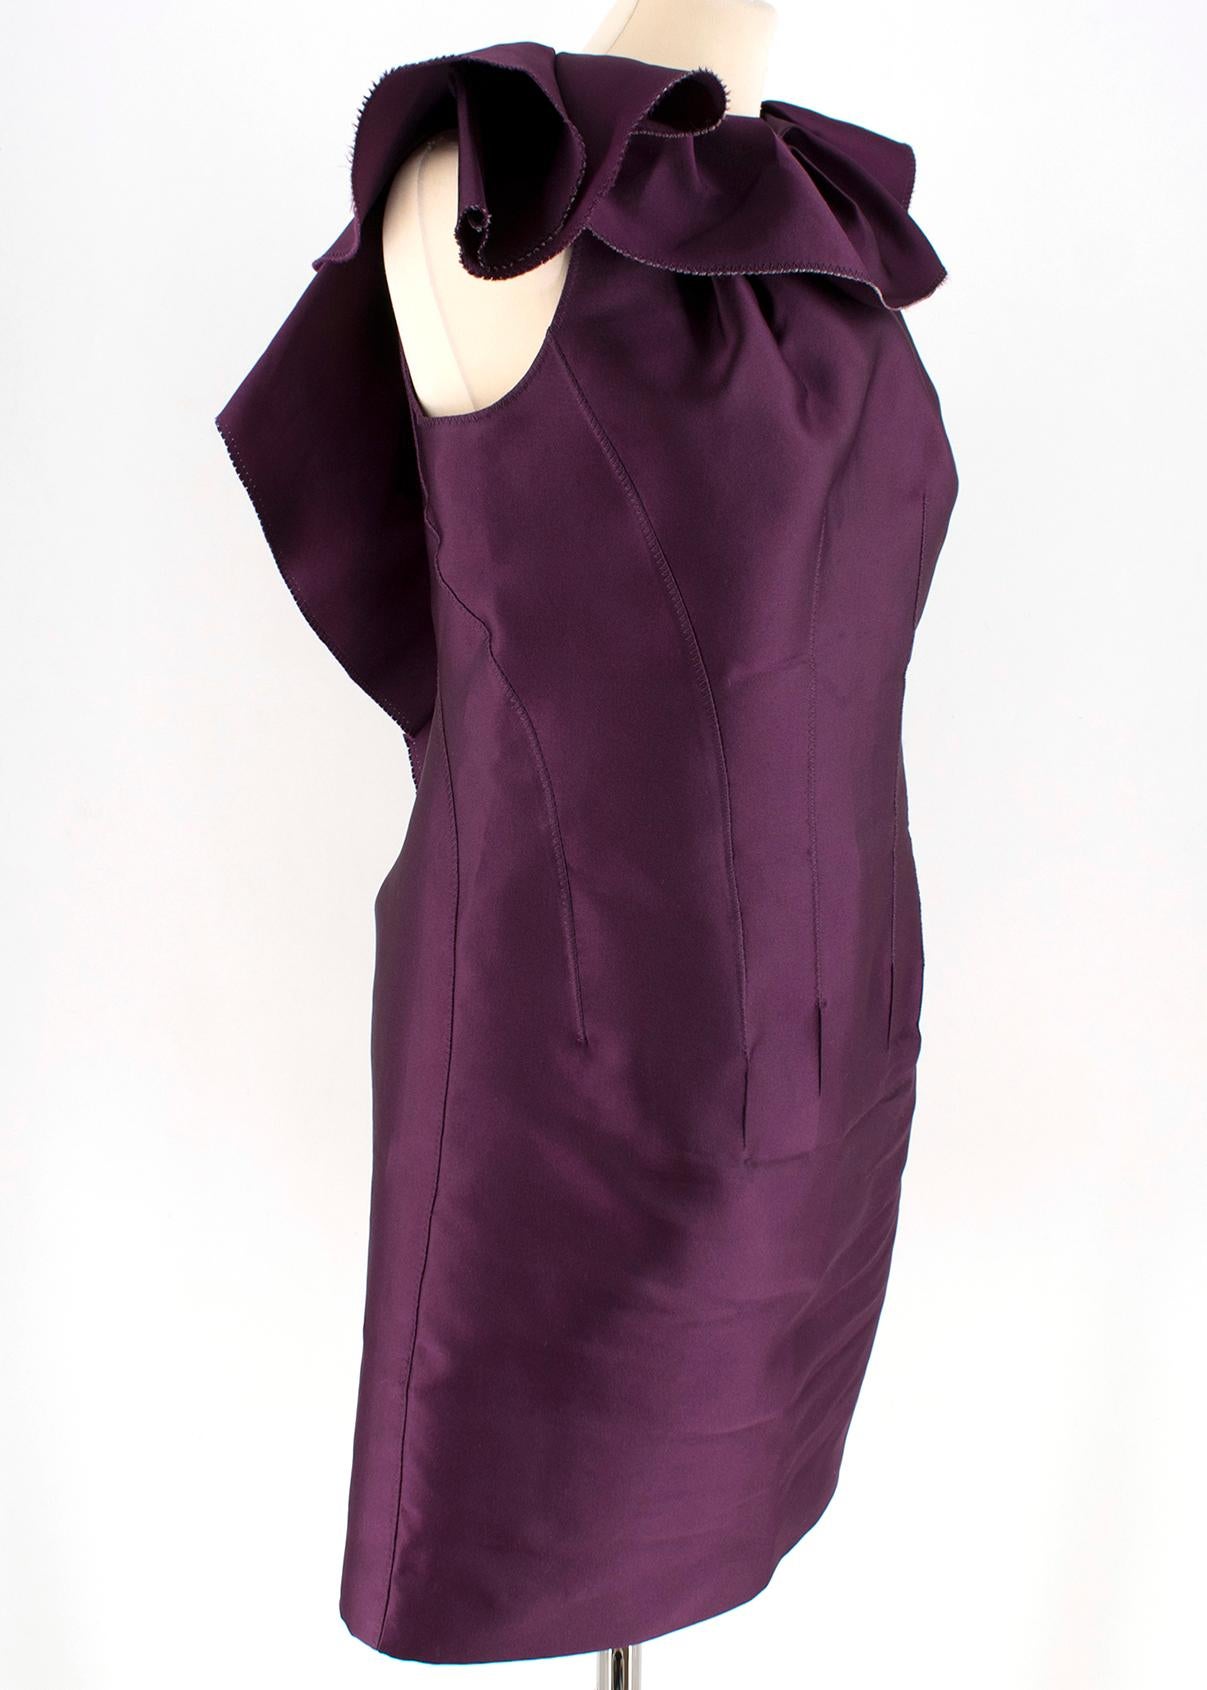 Lanvin Purple Ruffled Silk Blend Duchesse & Lace Dress

-Purple, slik blend
-Ruffled neckline 
-Cross stitch detailing 
-Black lace embroidery on back
-Back zip closure 

Please note, these items are pre-owned and may show some signs of storage,